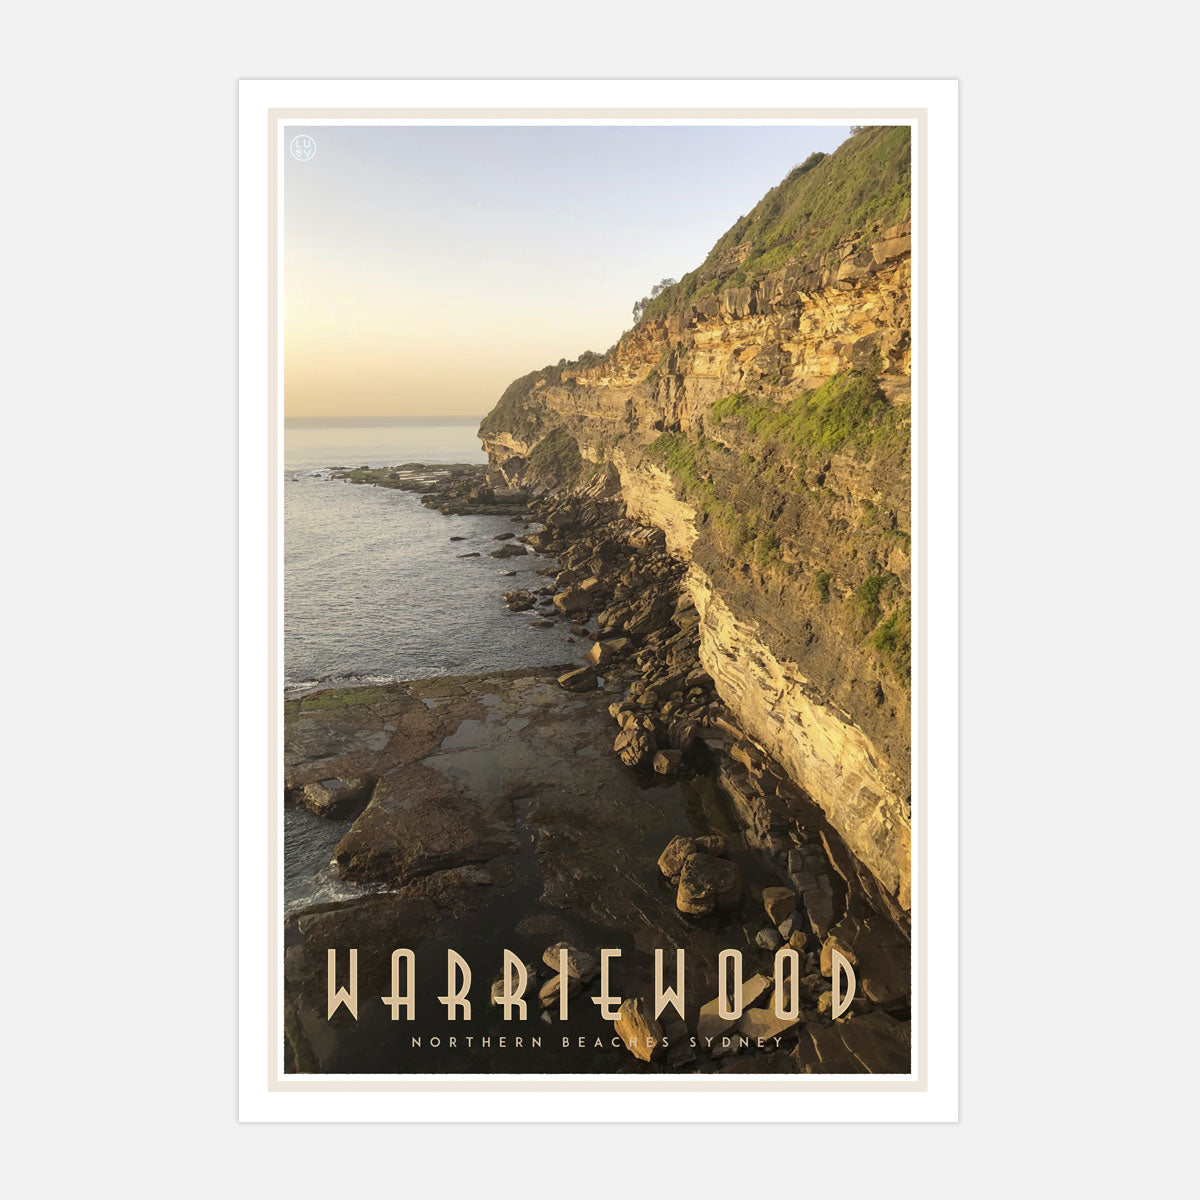 Warriewood vintage travel style print designed by places we luv